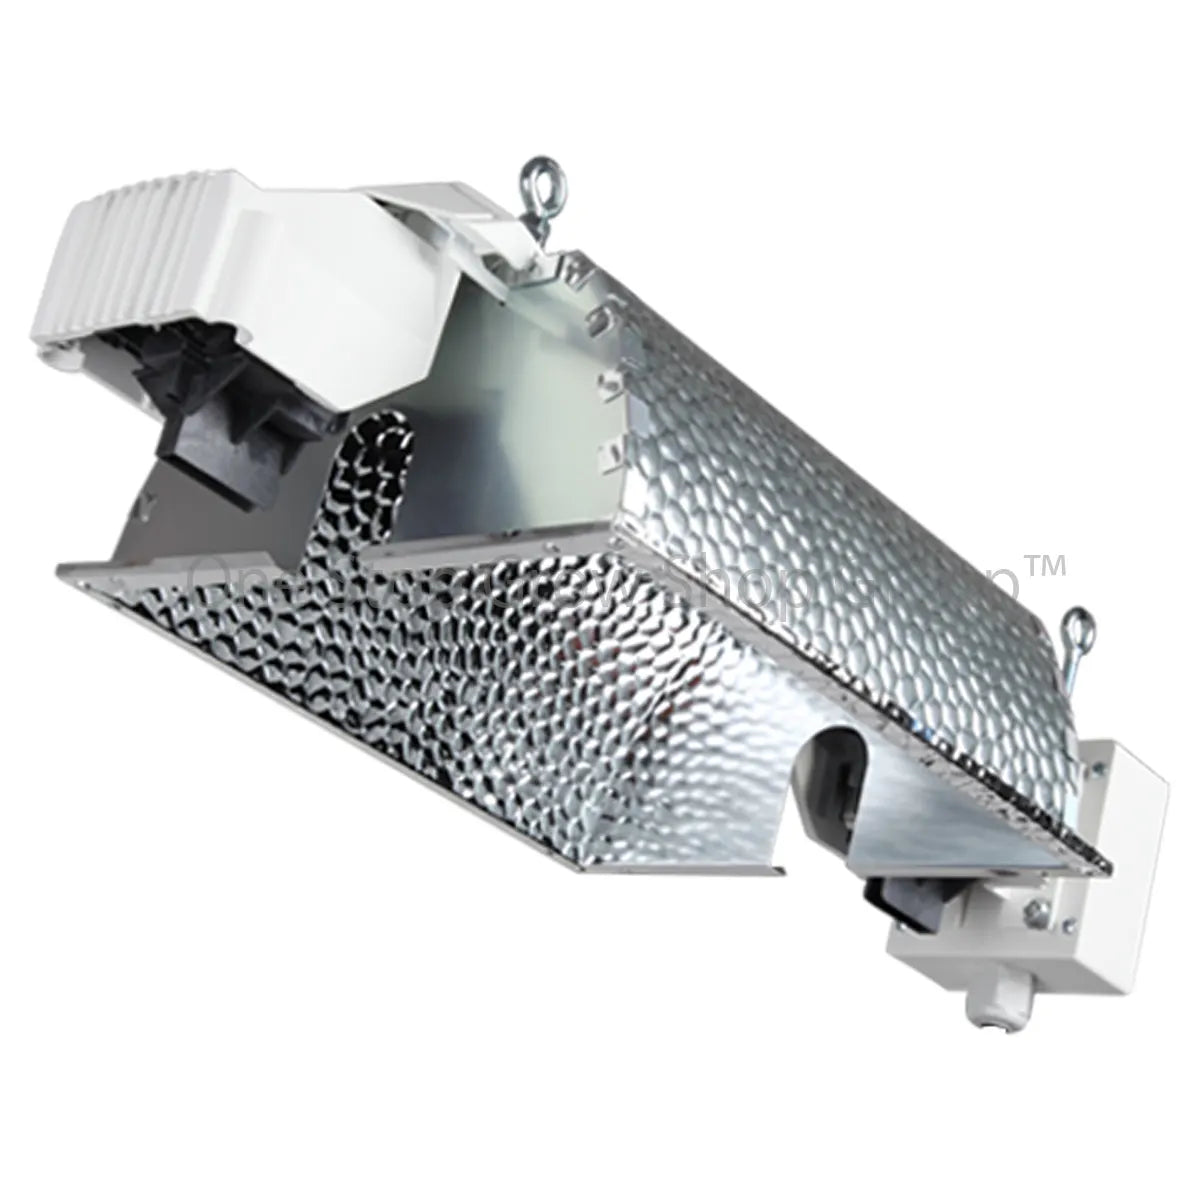 The Gavita Pro 750e Grow Light – Awesome Efficiency and Flexibility!